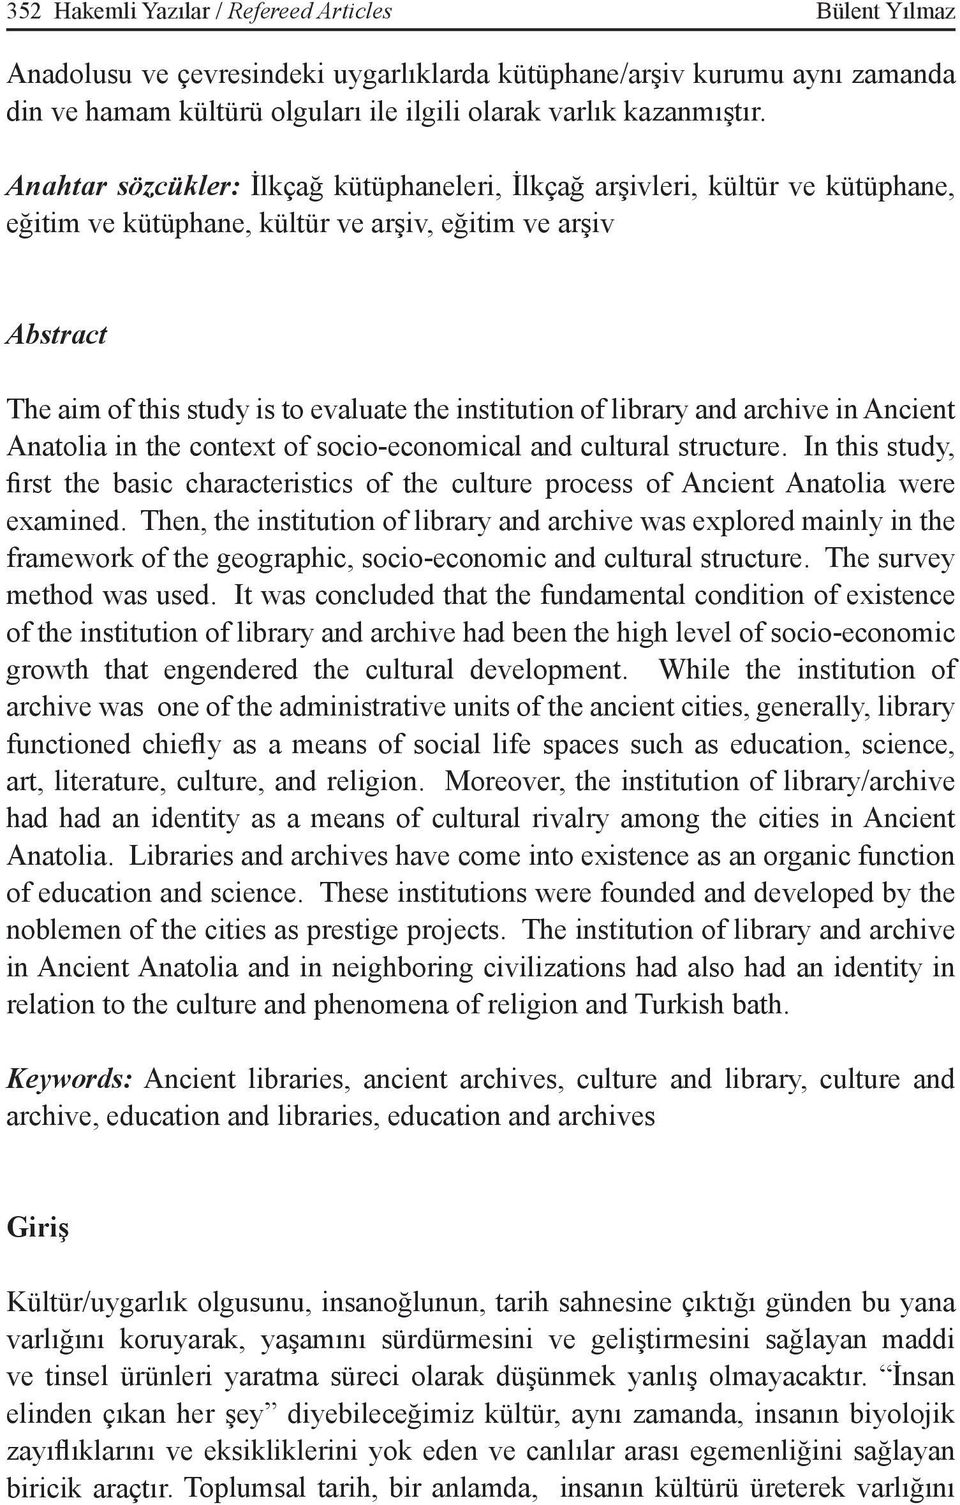 library and archive in Ancient Anatolia in the context of socio-economical and cultural structure.